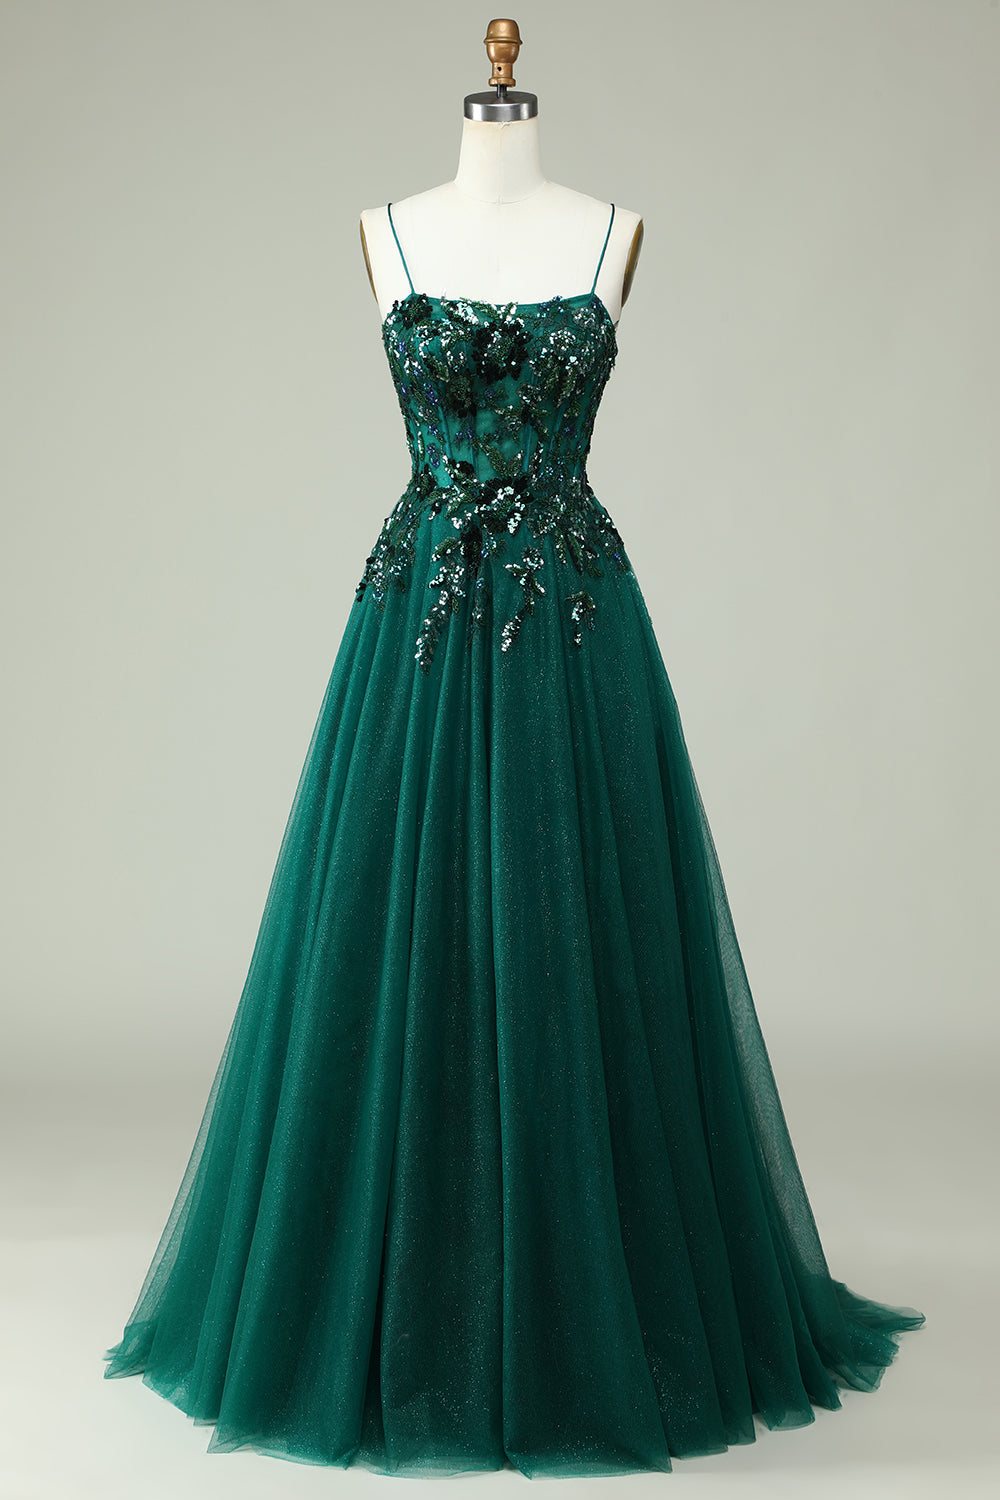 Prom Dresses Website, A Line Spaghetti Straps Dark Green Corset Prom Dress with Appliques